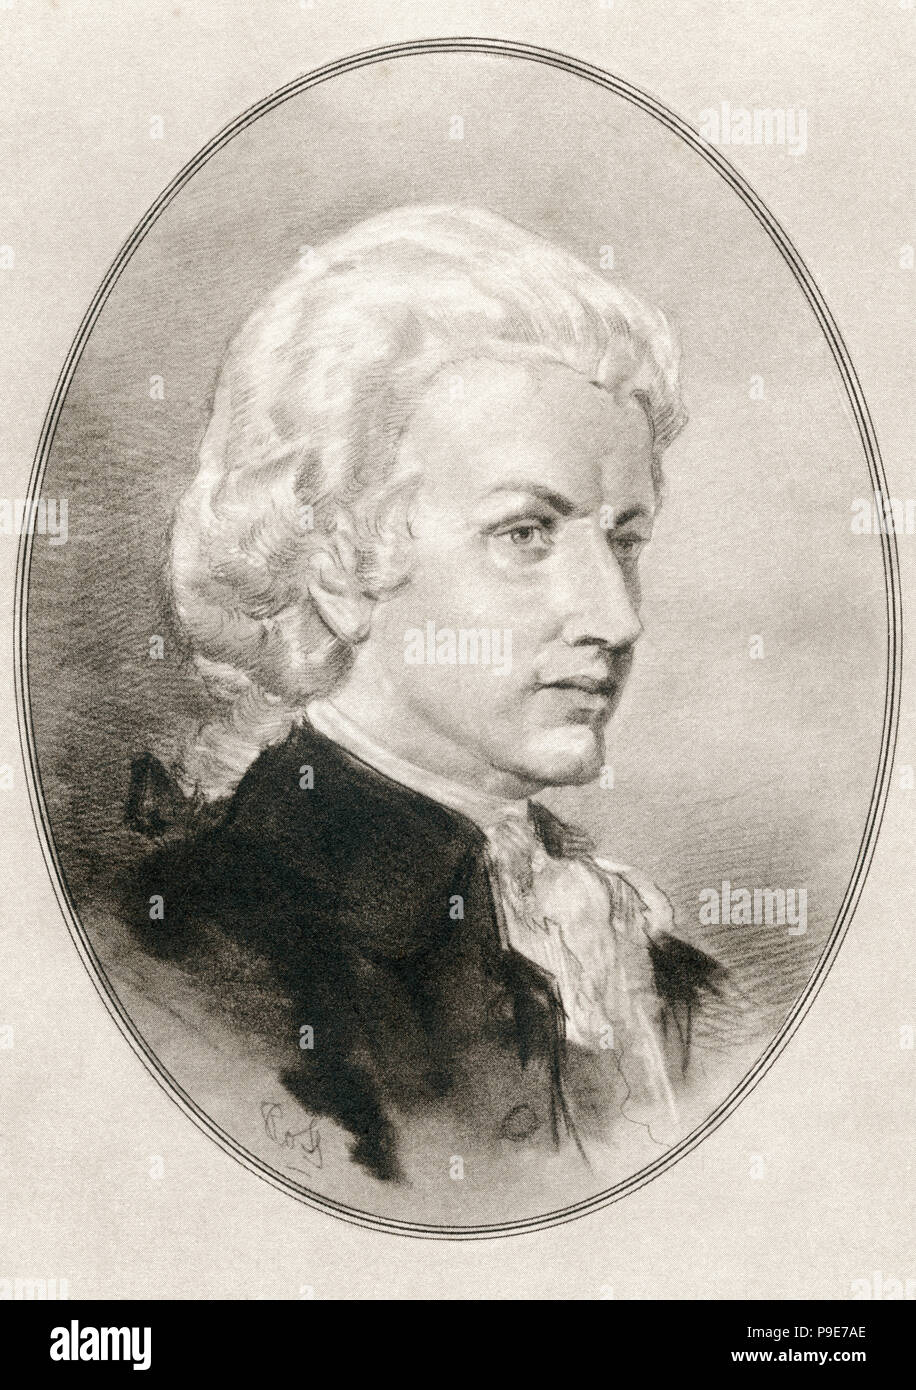 Wolfgang Amadeus Mozart, 1756 – 1791, baptised as Johannes Chrysostomus Wolfgangus Theophilus Mozart.  Prolific and influential composer of the classical era.  Illustration by Gordon Ross, American artist and illustrator (1873-1946), from Living Biographies of Great Composers. Stock Photo